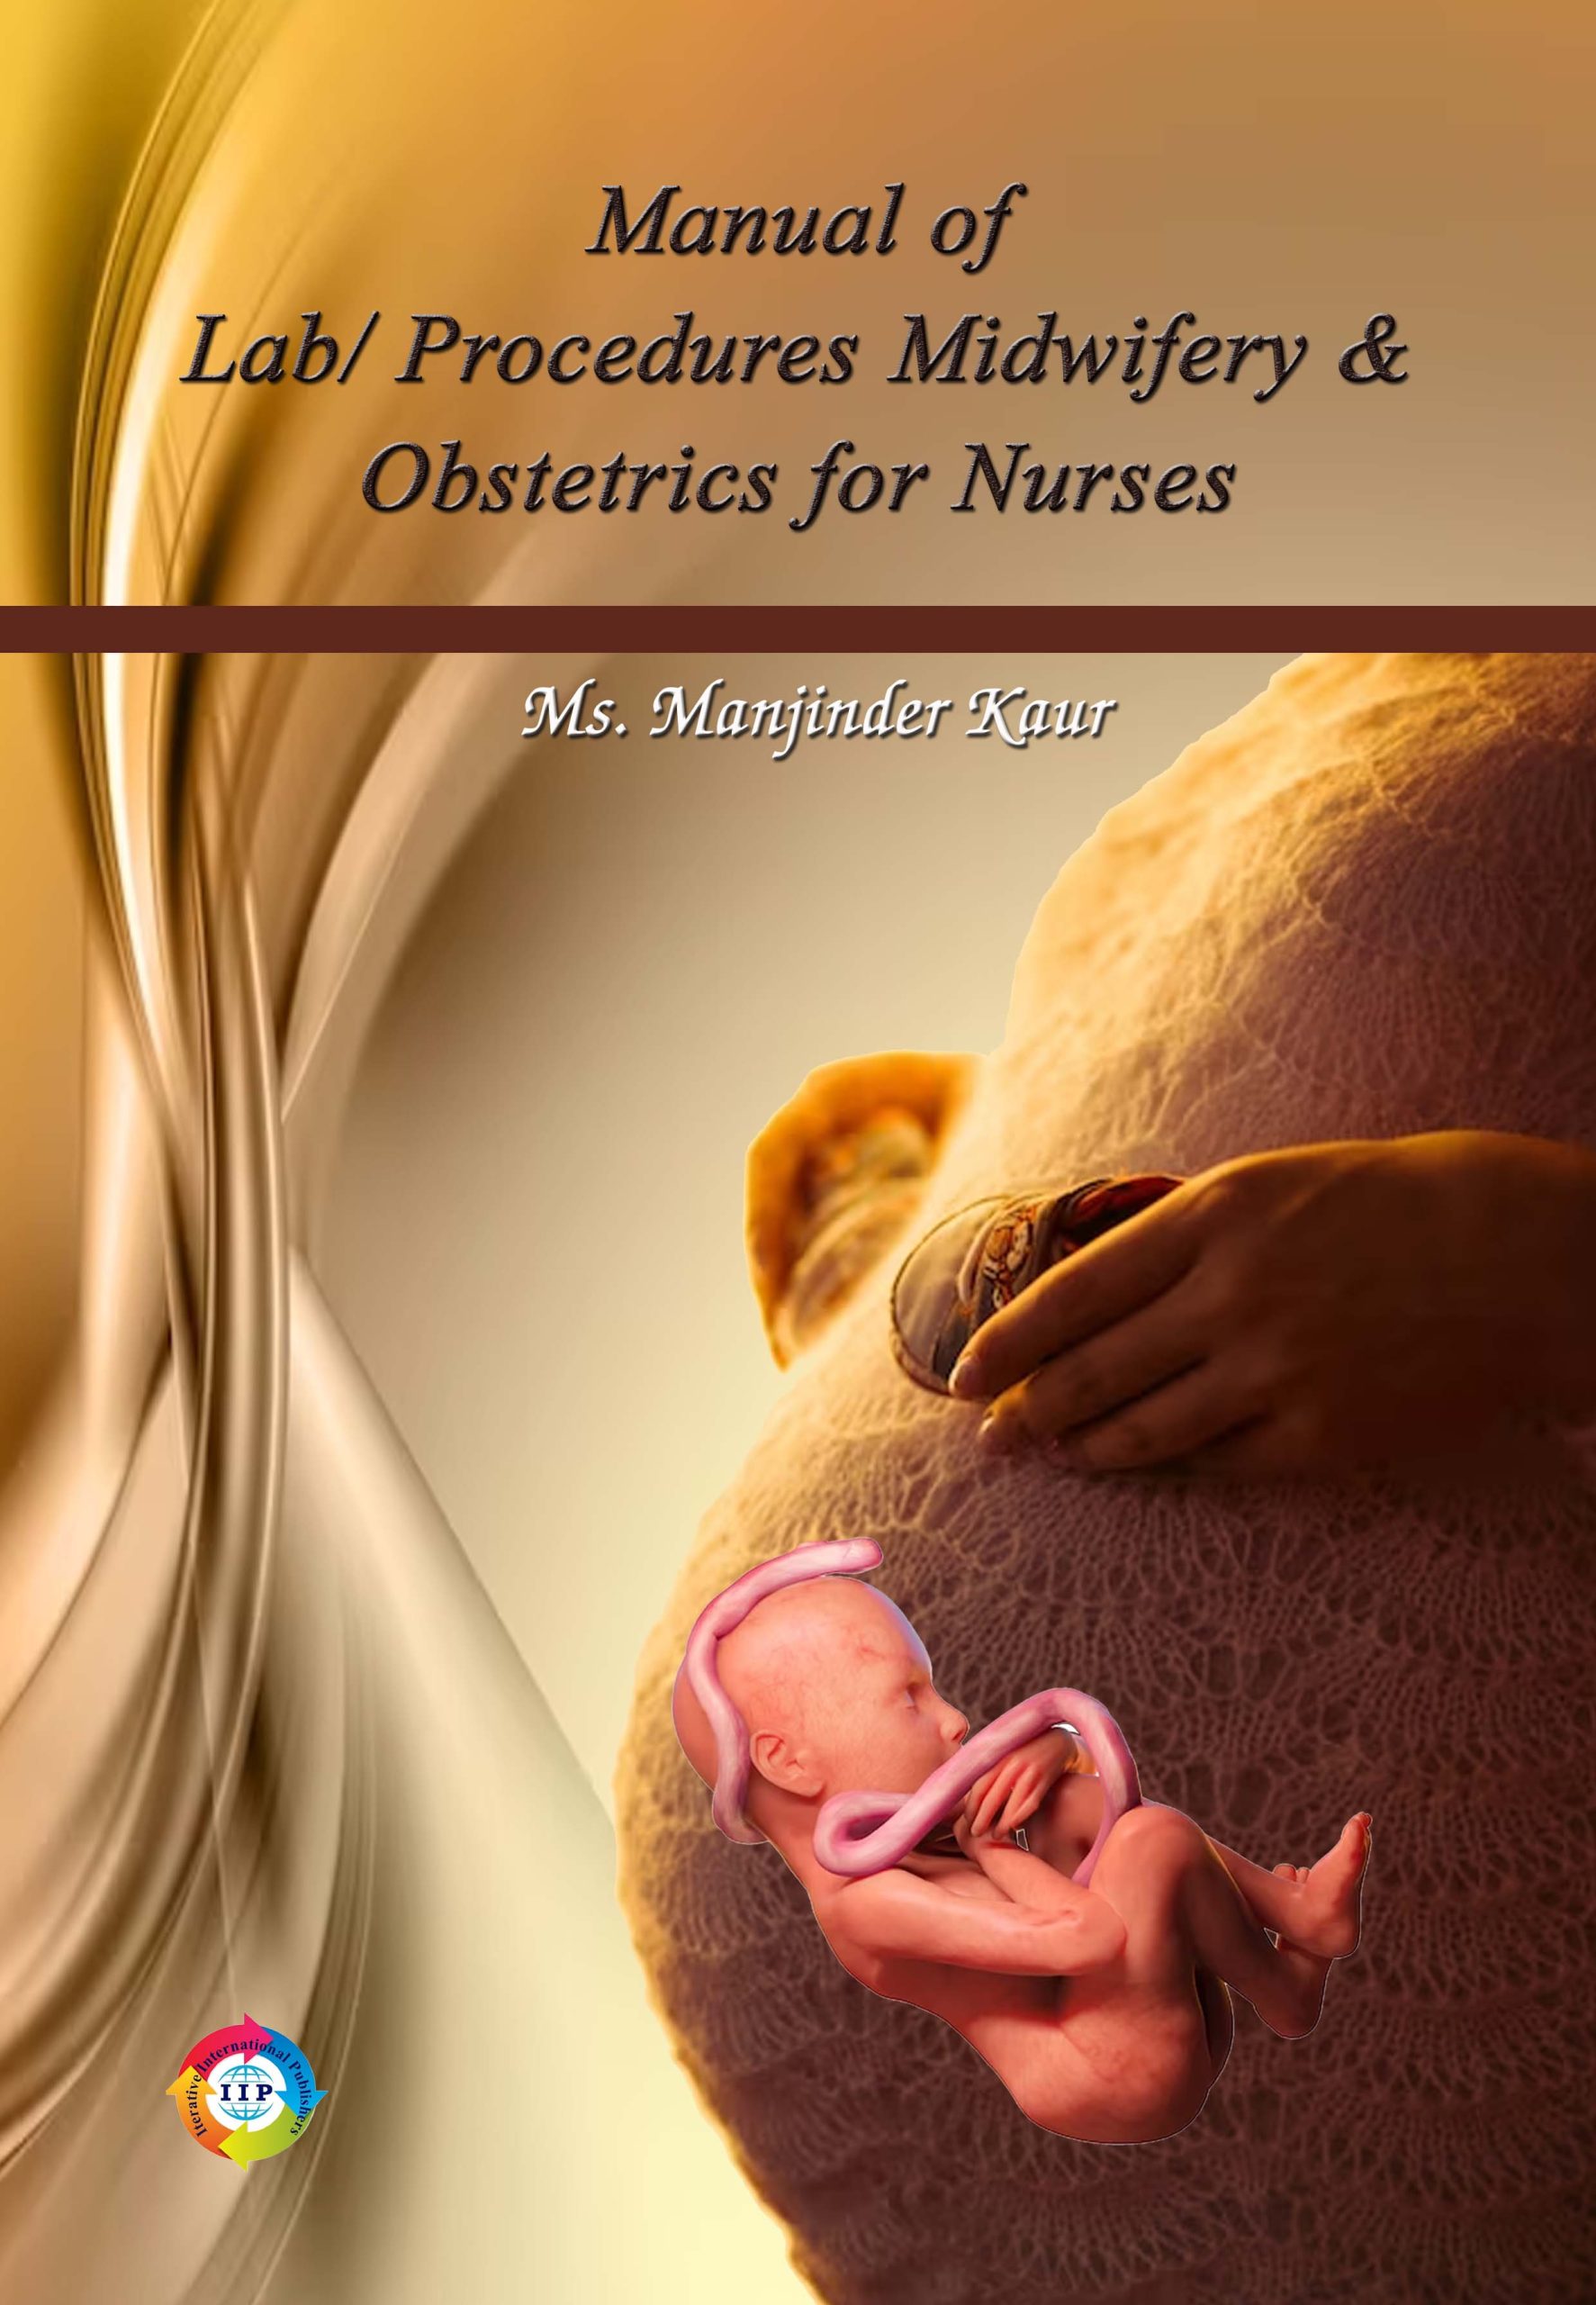 A handbook of obstetrical nursing for nurses, students, and